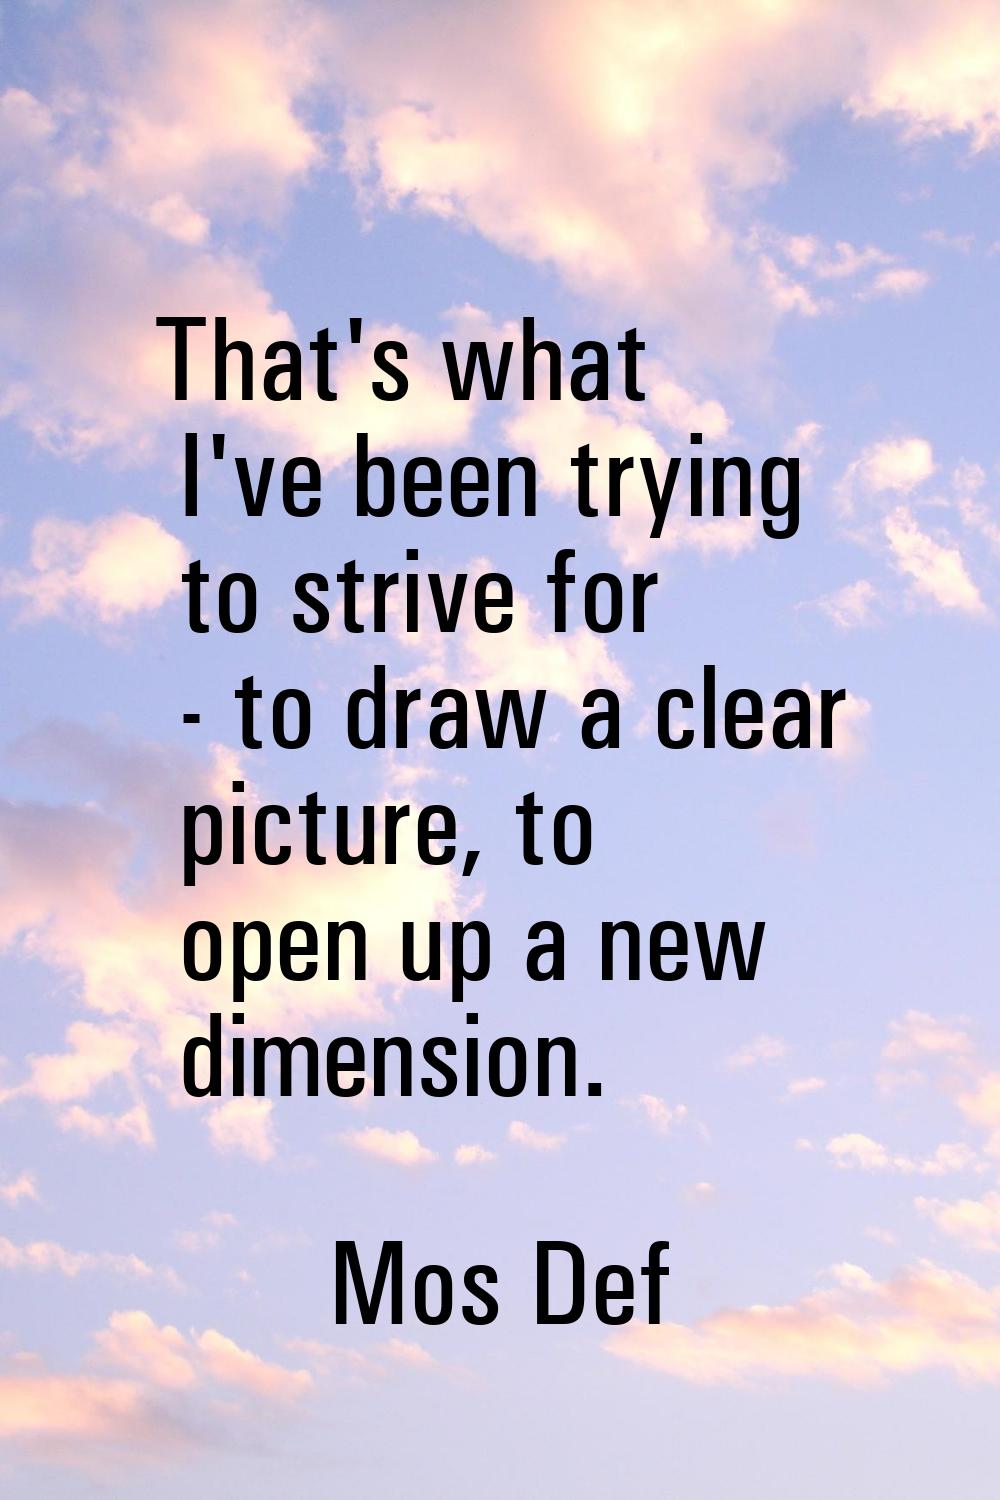 That's what I've been trying to strive for - to draw a clear picture, to open up a new dimension.